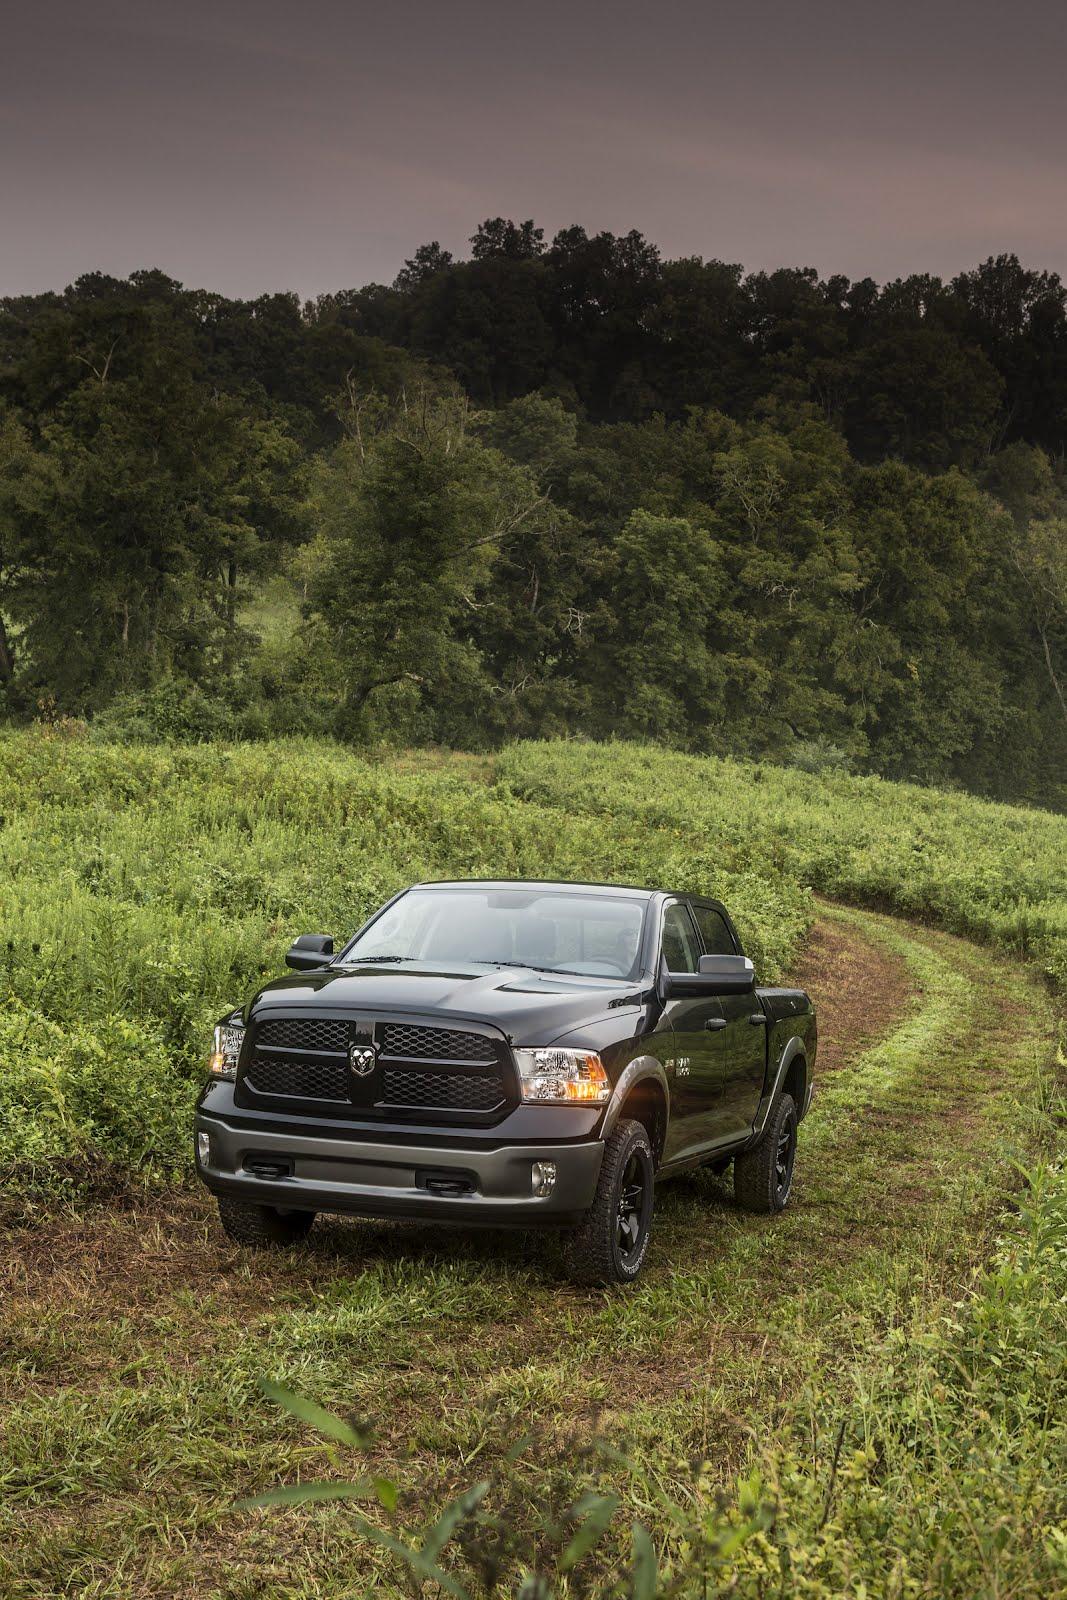 Dodge Ram Outdoorsman photo pictures at high resolution